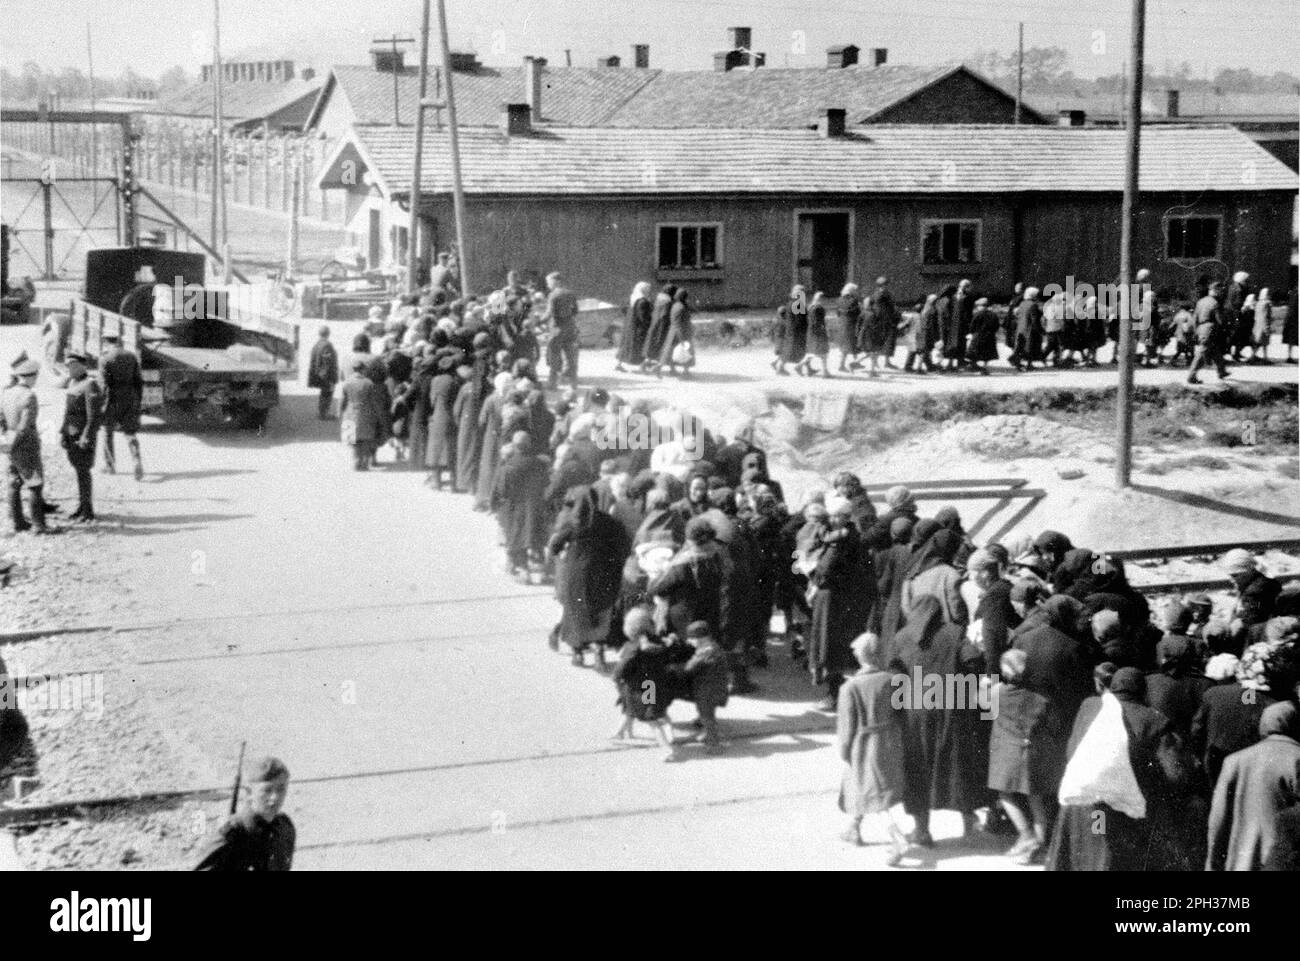 Jewish women and children from Hungary walking toward the gas chamber, Auschwitz II, May/June 1944.fter the selection process on the train station platform, those doomed to die were walked directly to the gas chambers. Stock Photo